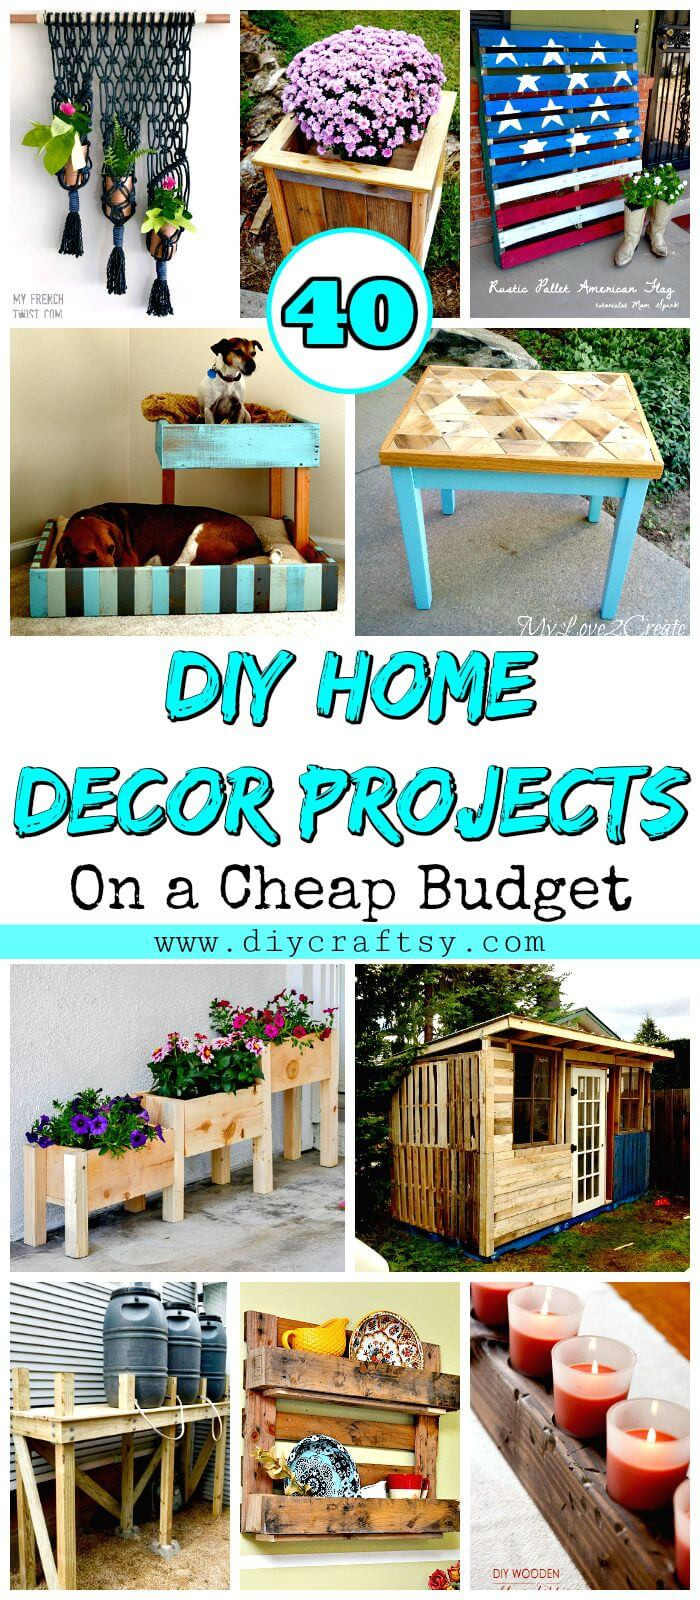 DIY Project Home Decor
 40 DIY Home Decor Projects on a Cheap Bud ⋆ DIY Crafts